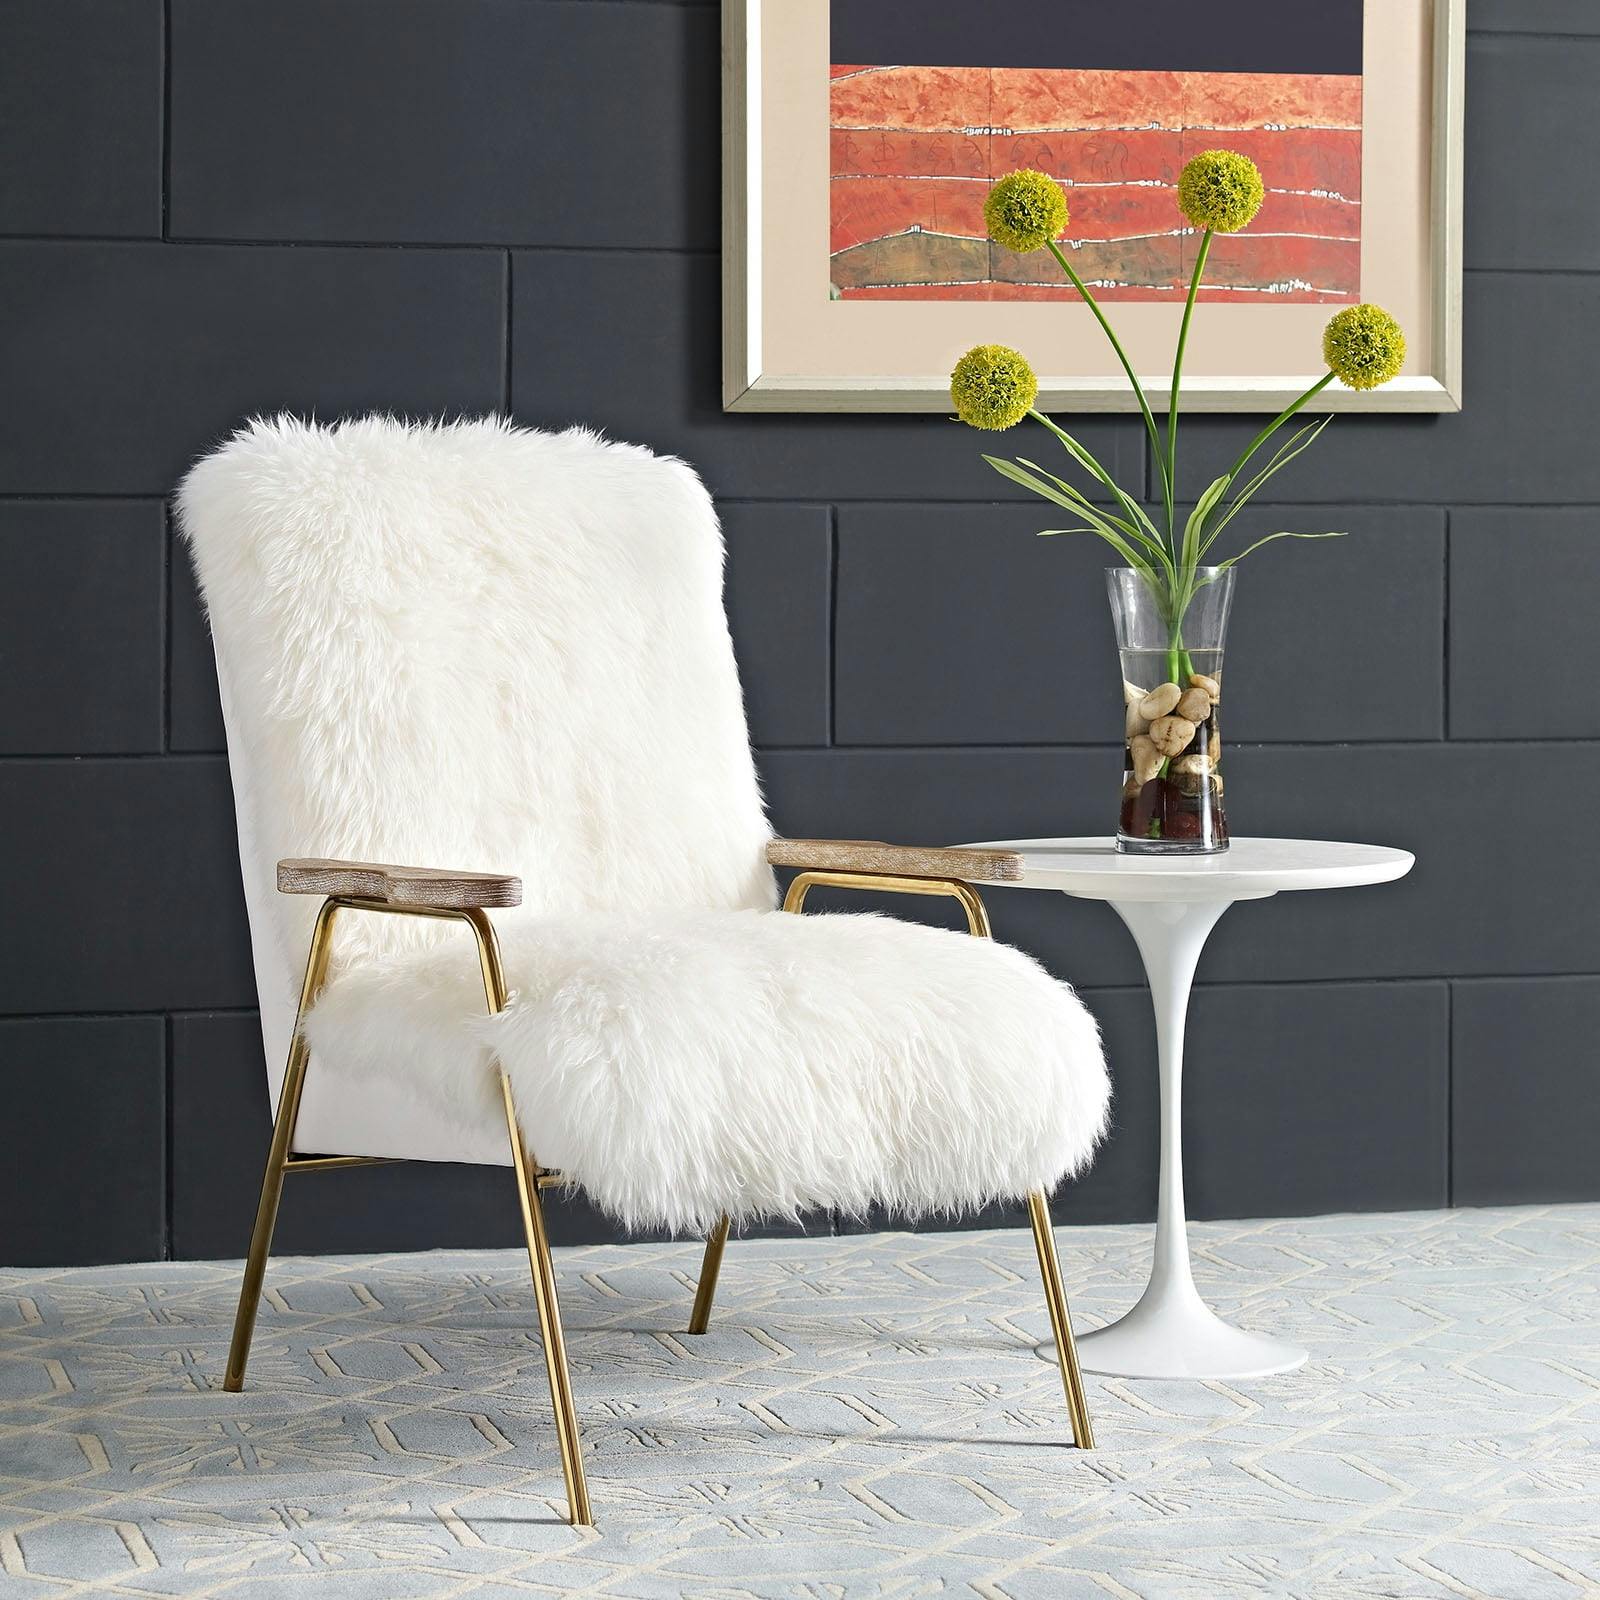 Sprint Chic Brown and White Sheepskin Armchair with Gold Accents